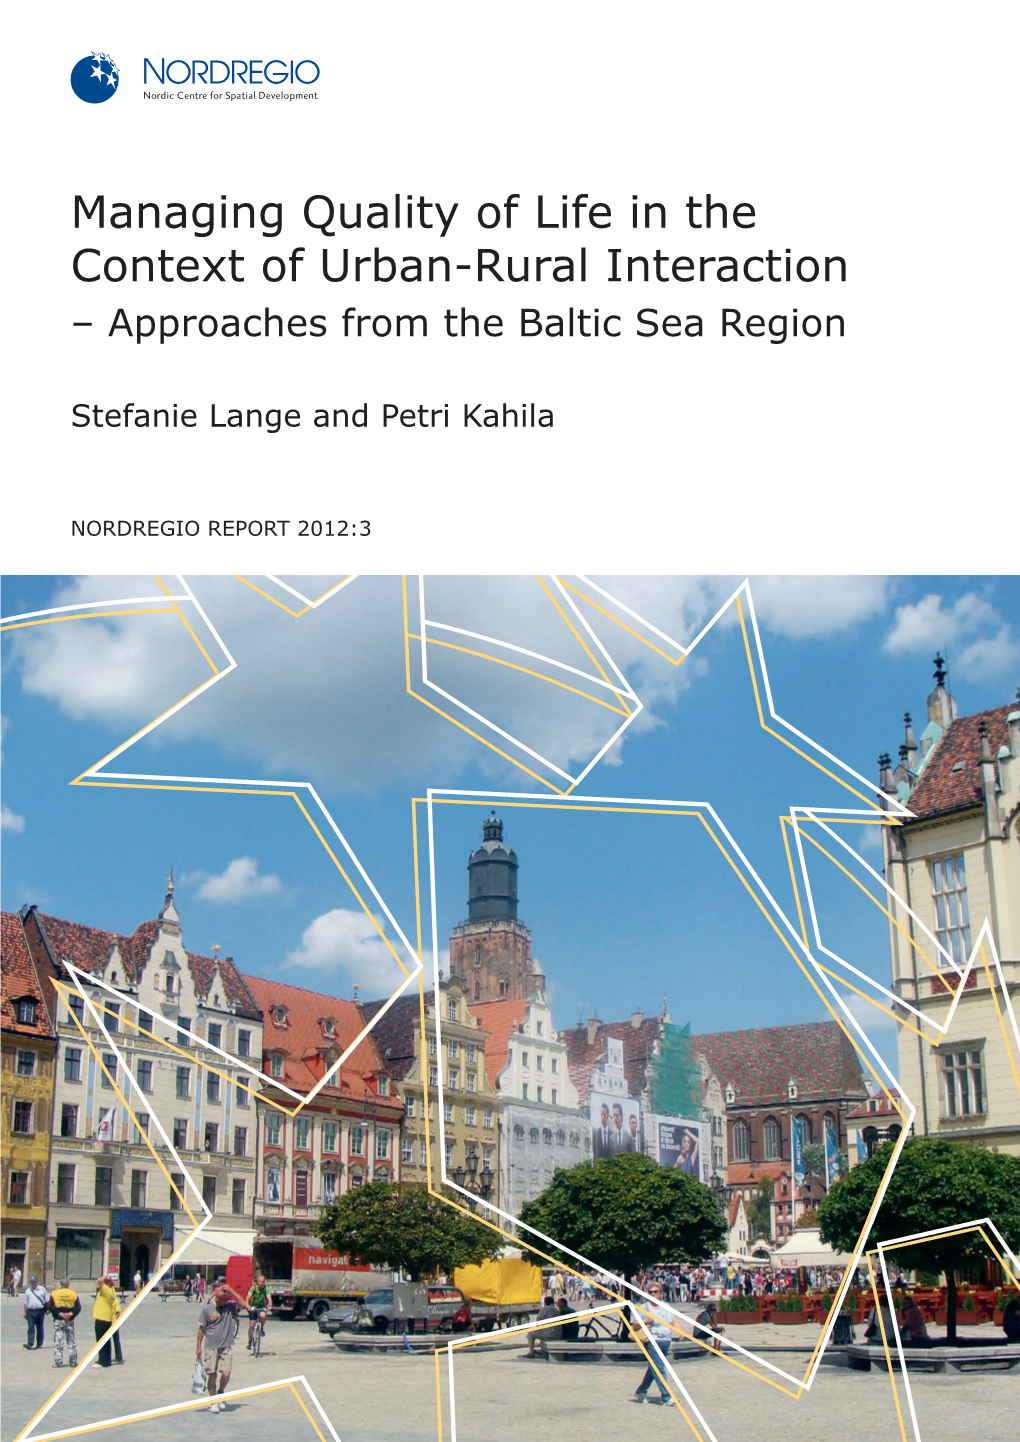 Managing Quality of Life in the Context of Urban-Rural Interaction – Approaches from the Baltic Sea Region